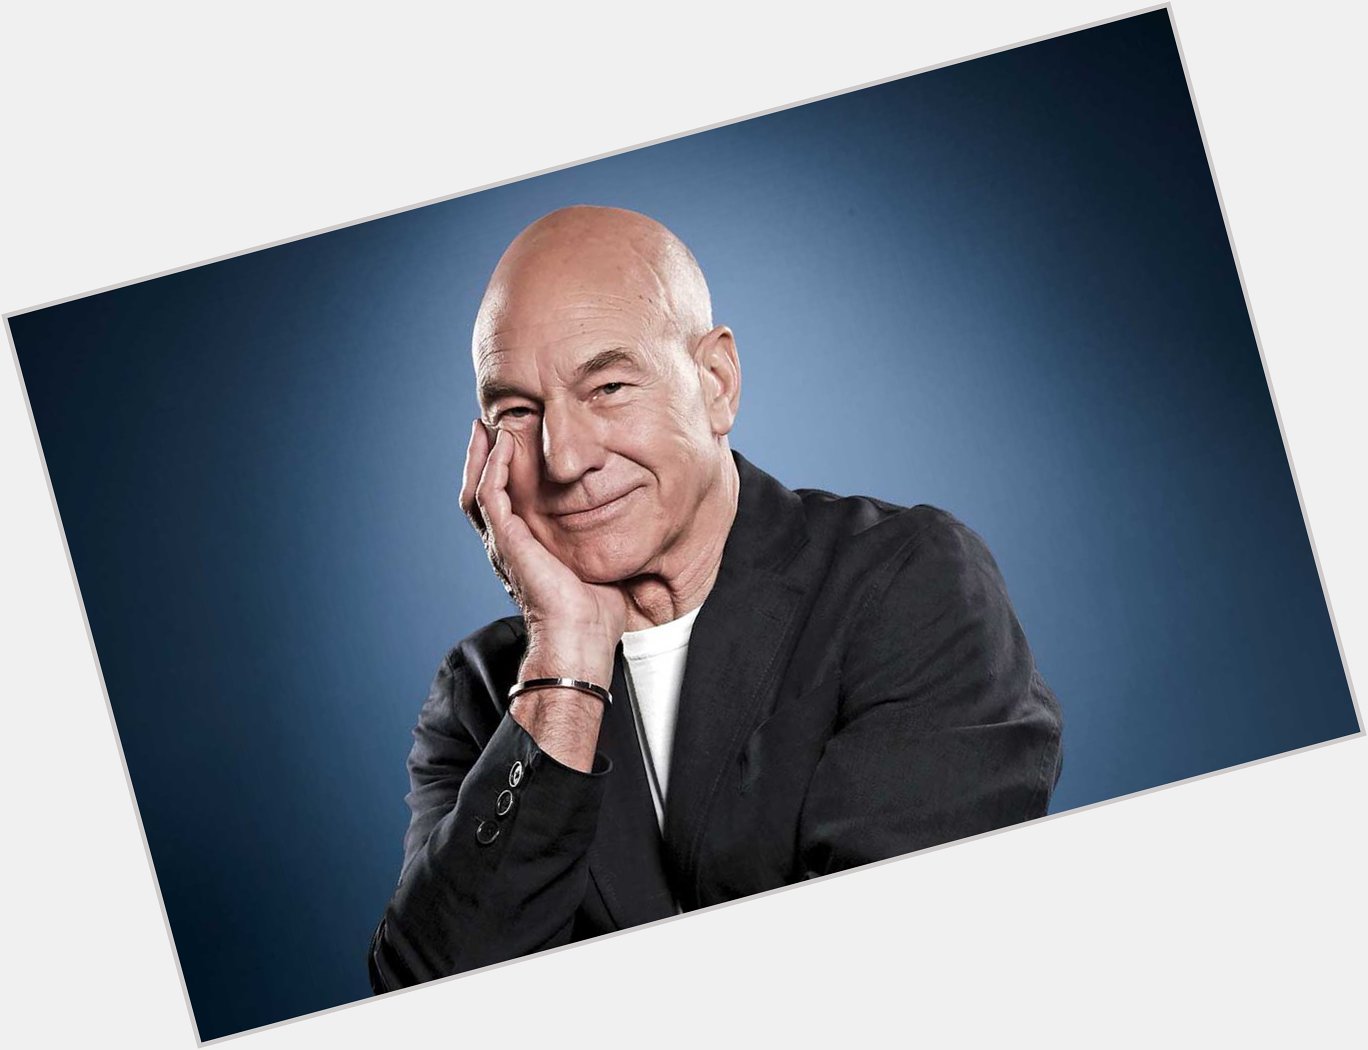 Happy Birthday Sir Patrick Stewart who was born on this day July 13, 1940 ~ always a fav!  